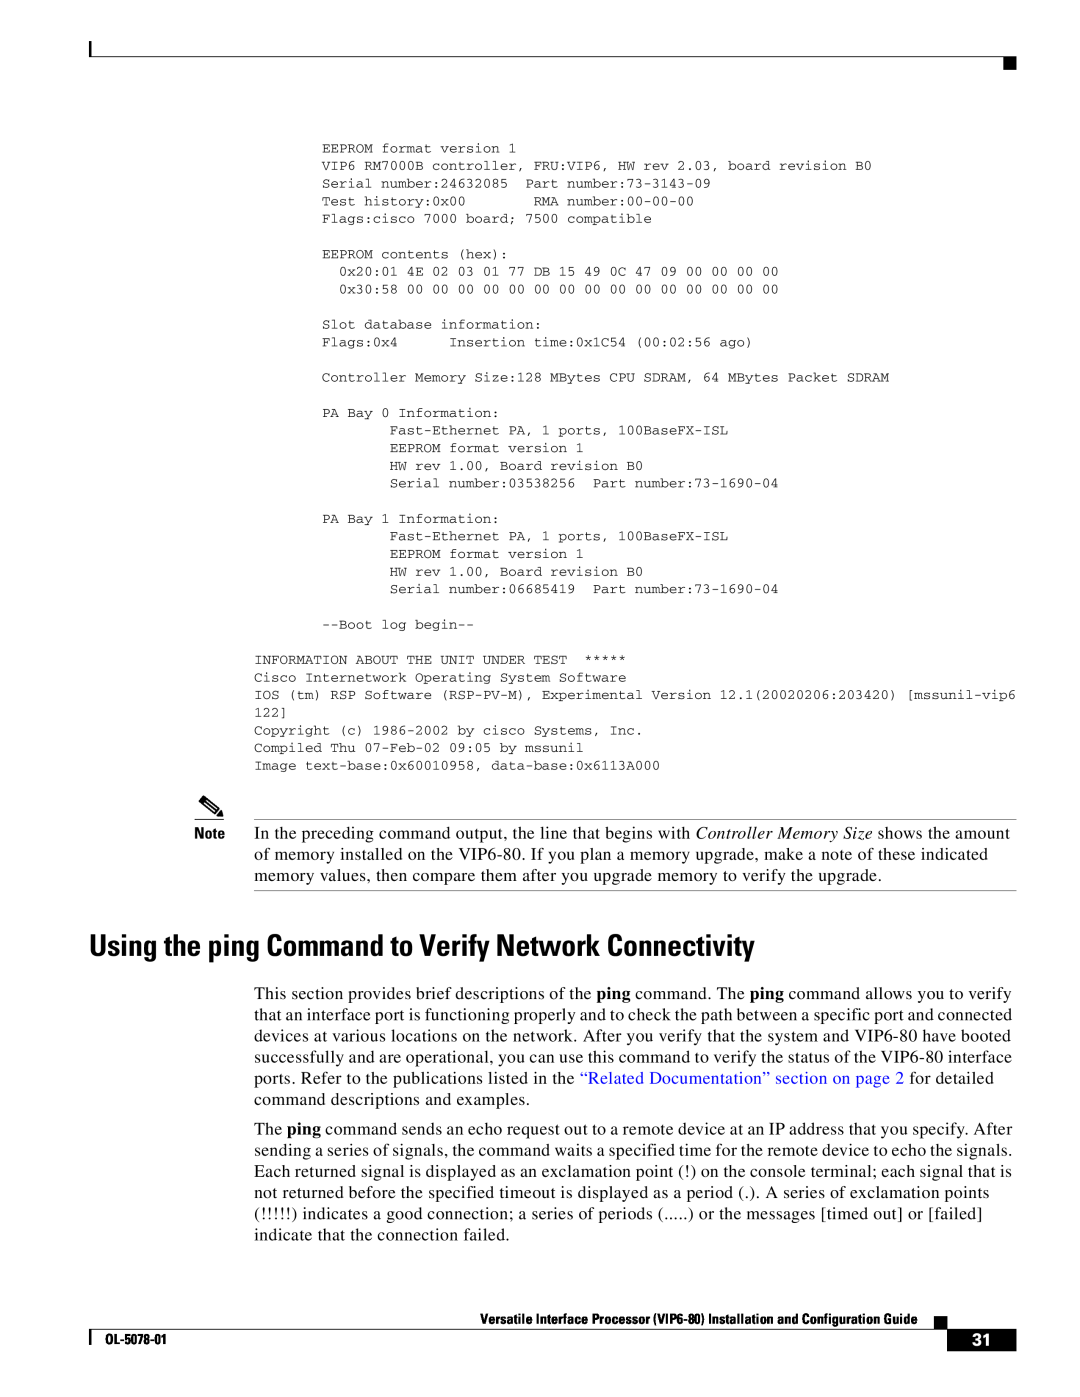 Cisco Systems (VIP6-80) manual Using the ping Command to Verify Network Connectivity 